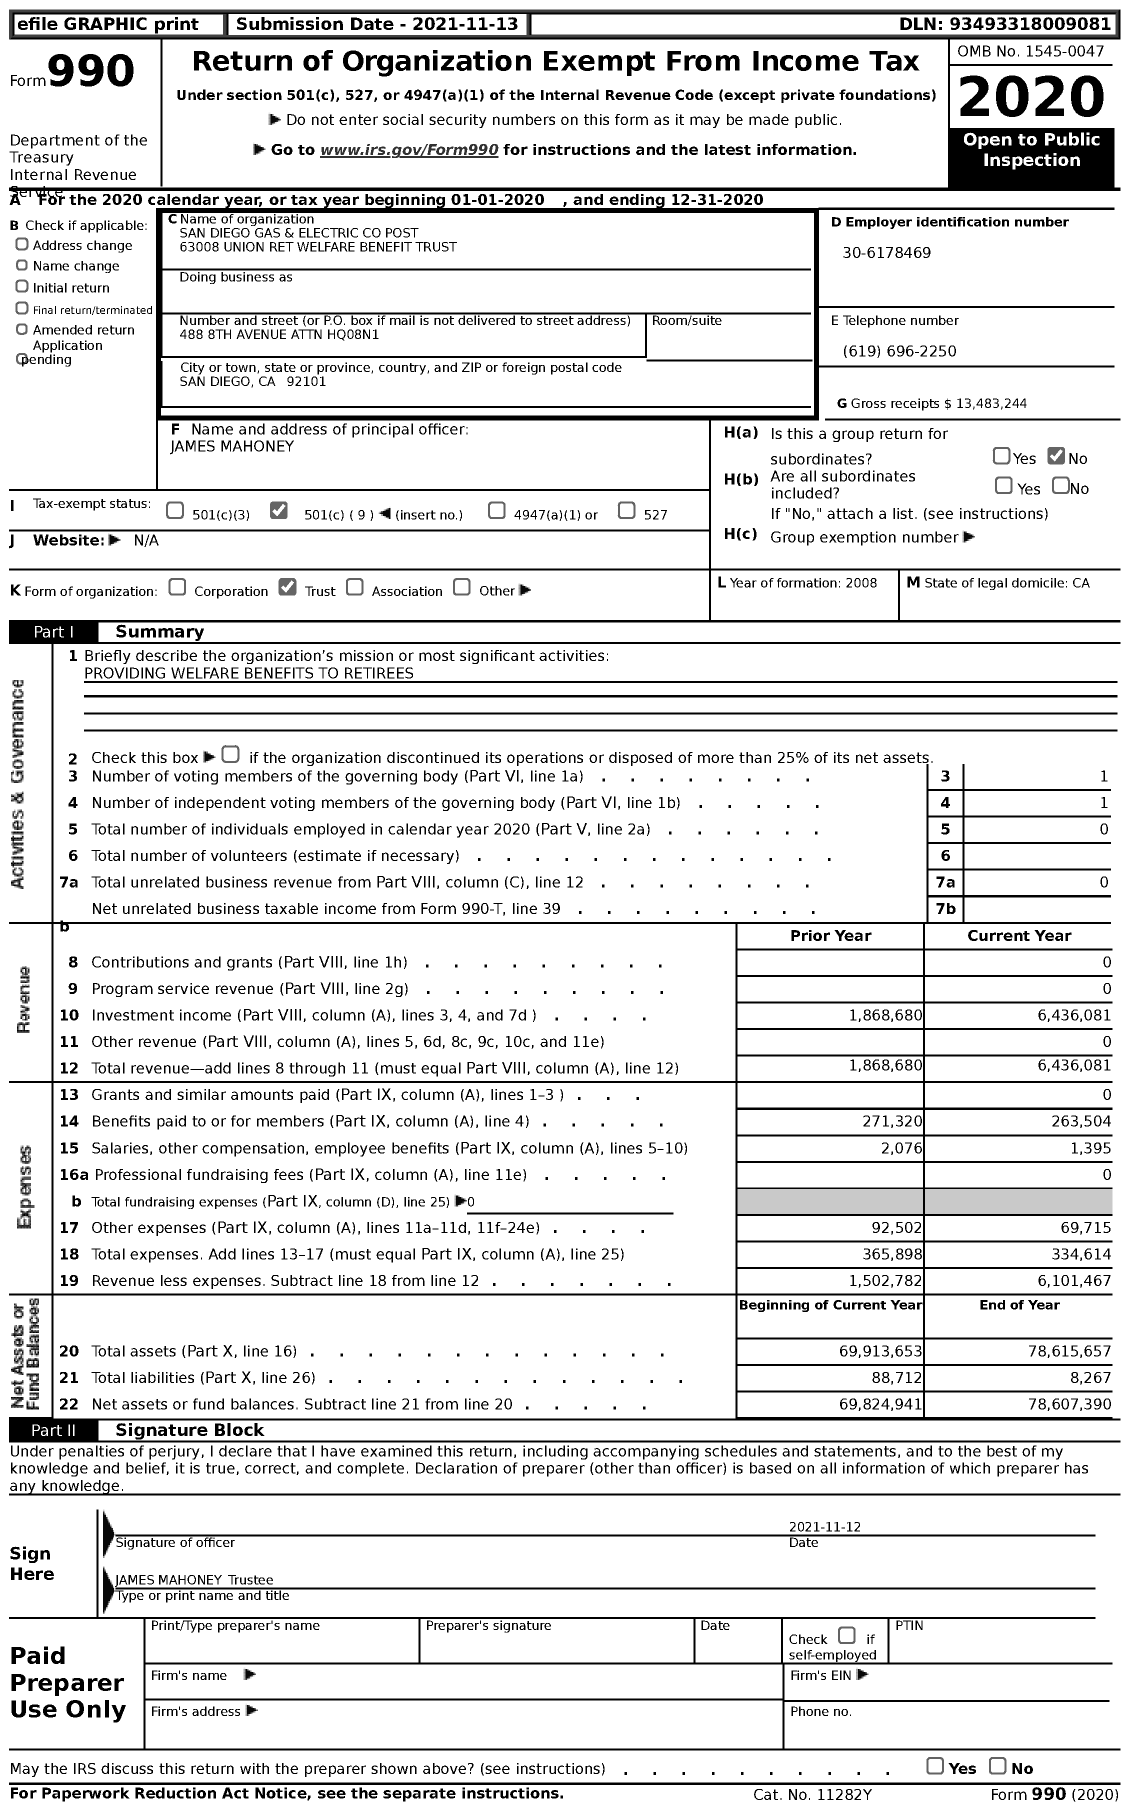 Image of first page of 2020 Form 990 for San Diego Gas and Electric Post 6 / 30 / 08 Union Ret Welfare Benefit Trust